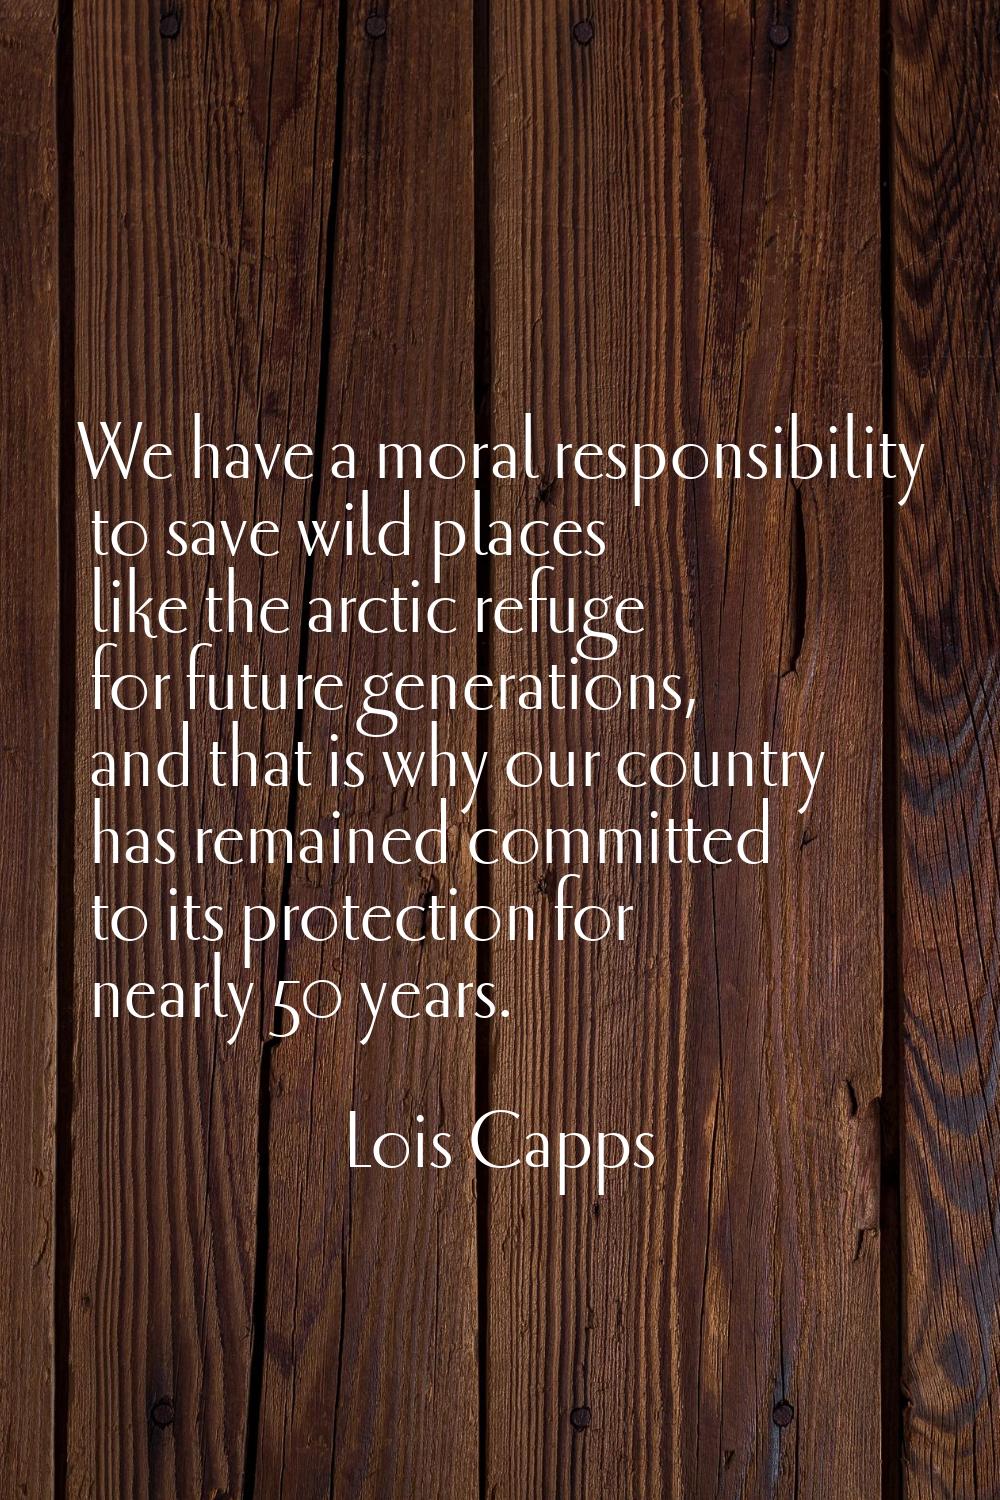 We have a moral responsibility to save wild places like the arctic refuge for future generations, a